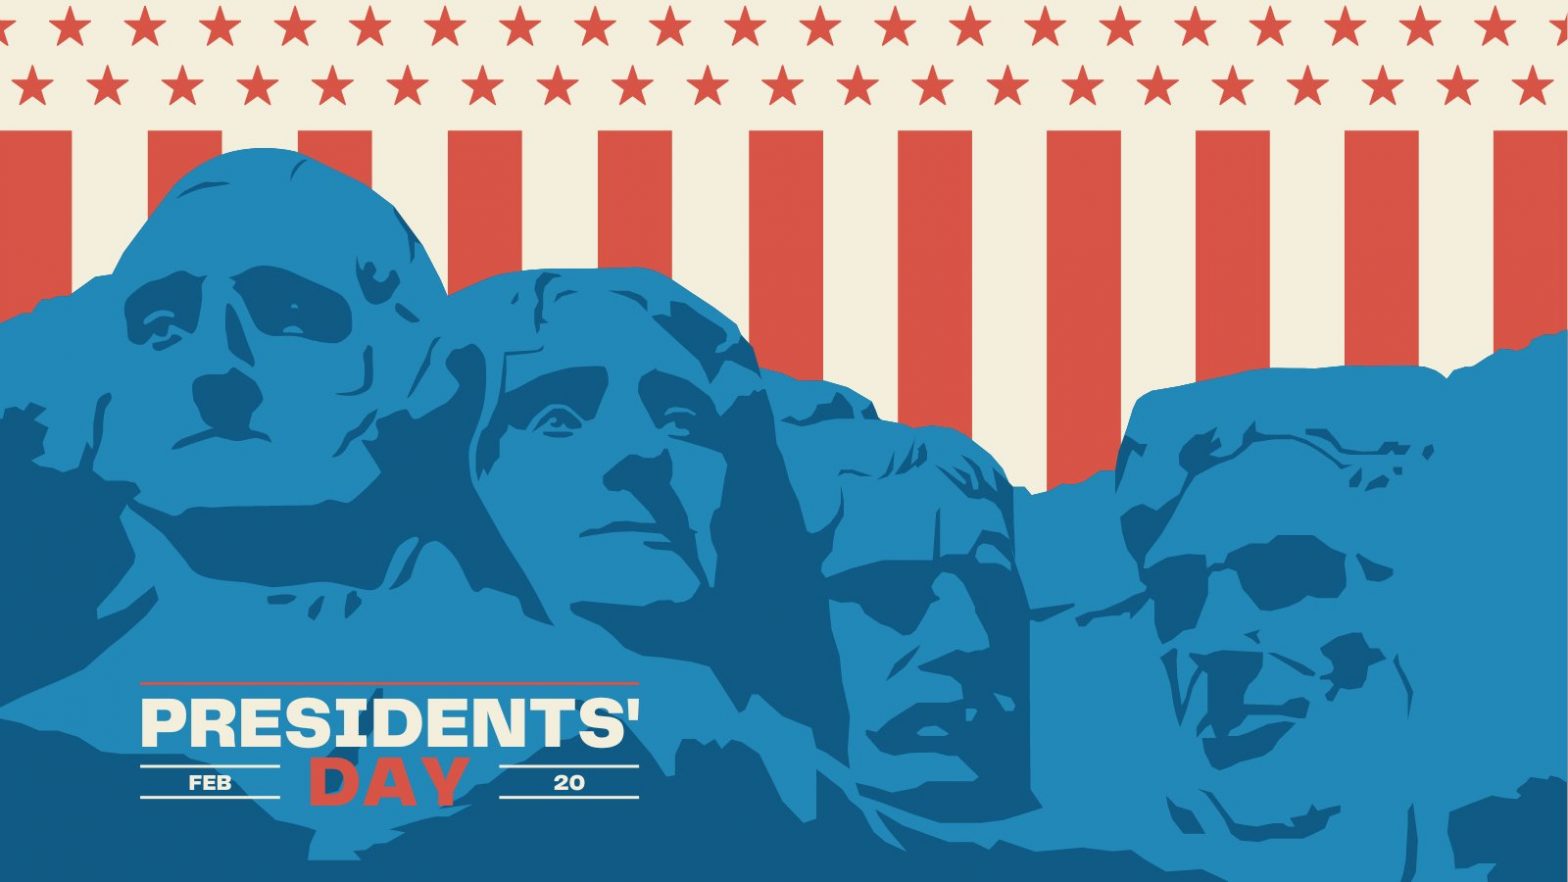 Presidents’ Day: What’s open, what’s closed on the federal holiday?